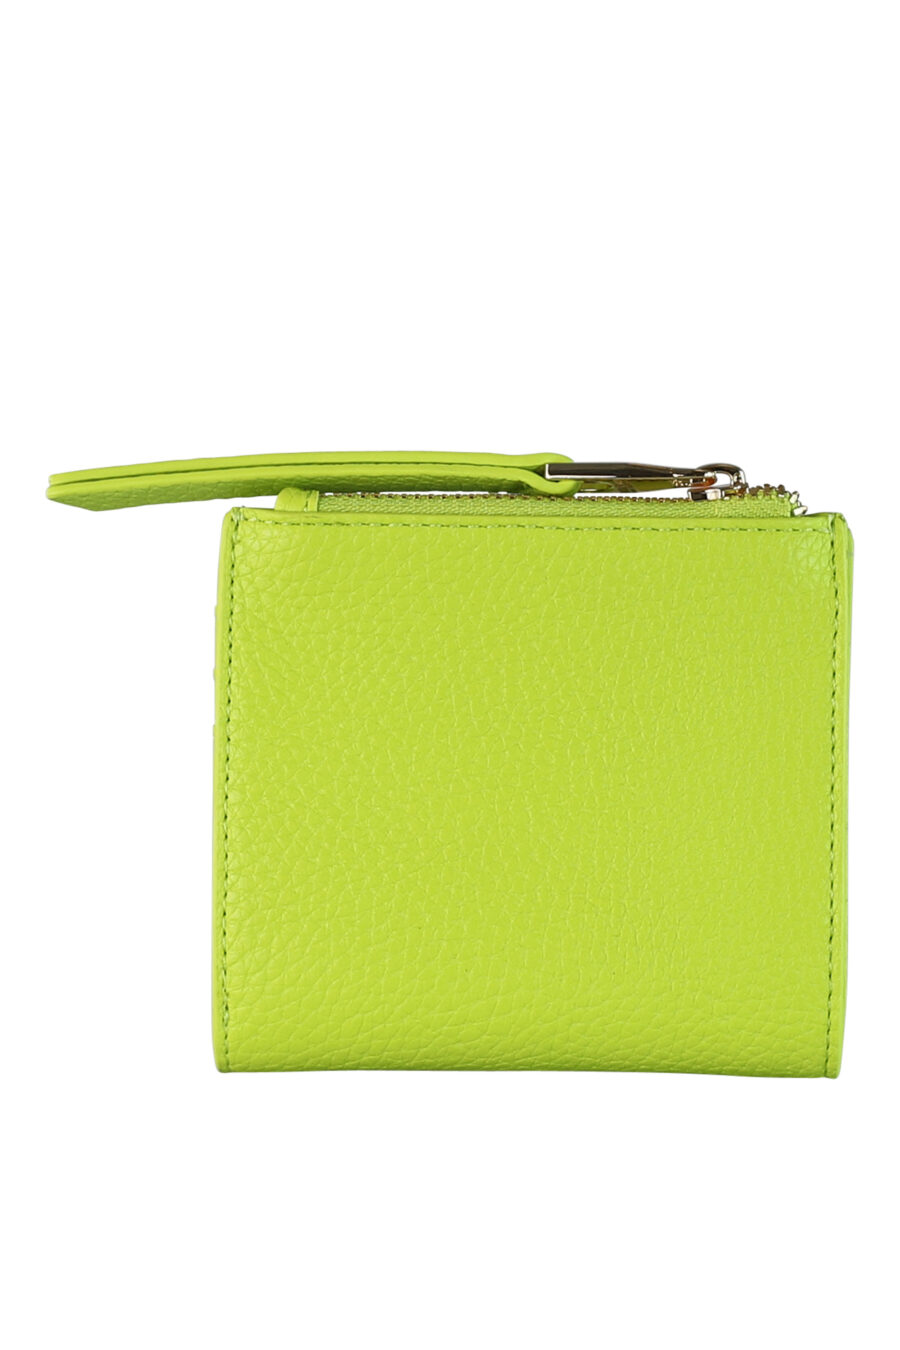 Green wallet with baroque buckle - IMG 0484